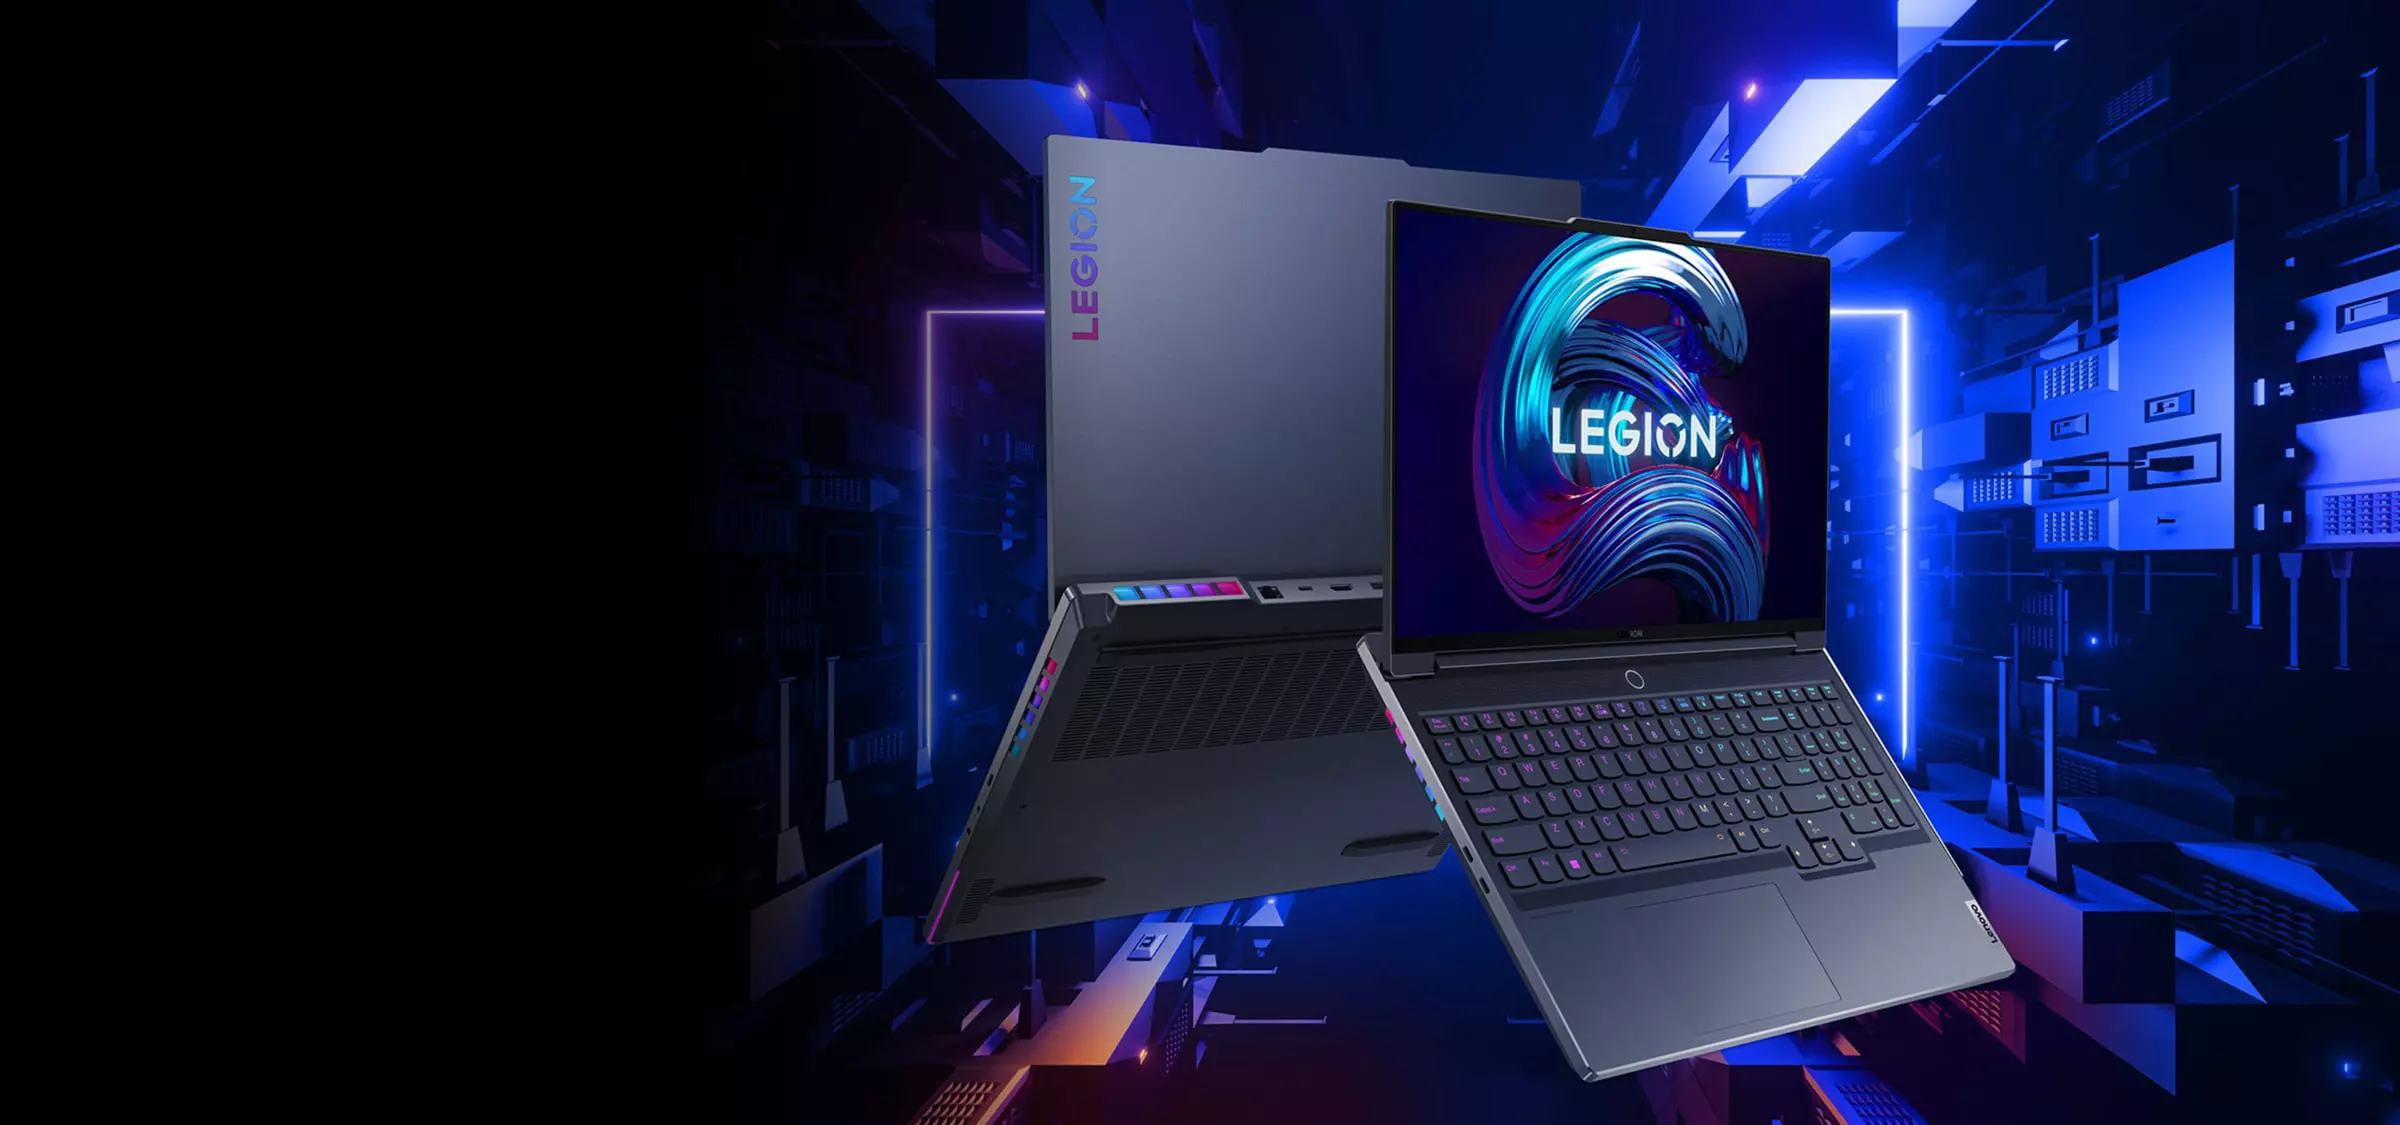 Front view of Lenovo Legion 7 laptop open 135 degrees, tilted forward off its base showing keyboard, display screen and angled to show left side ports and mirrored view of back side.